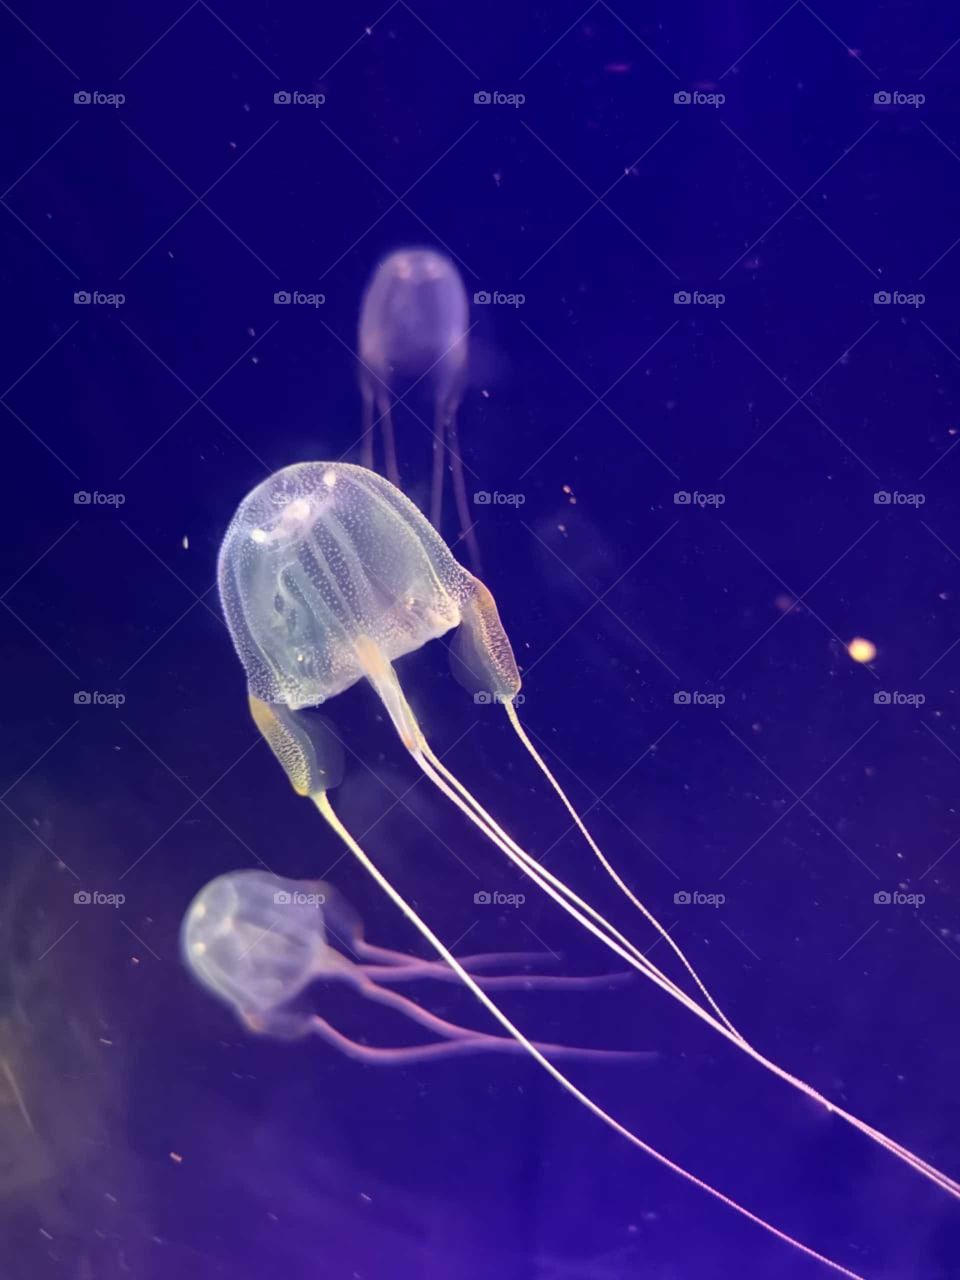 JellyFish
In the osean lies a lot of terror...Yet these calm creatures shine their lights.